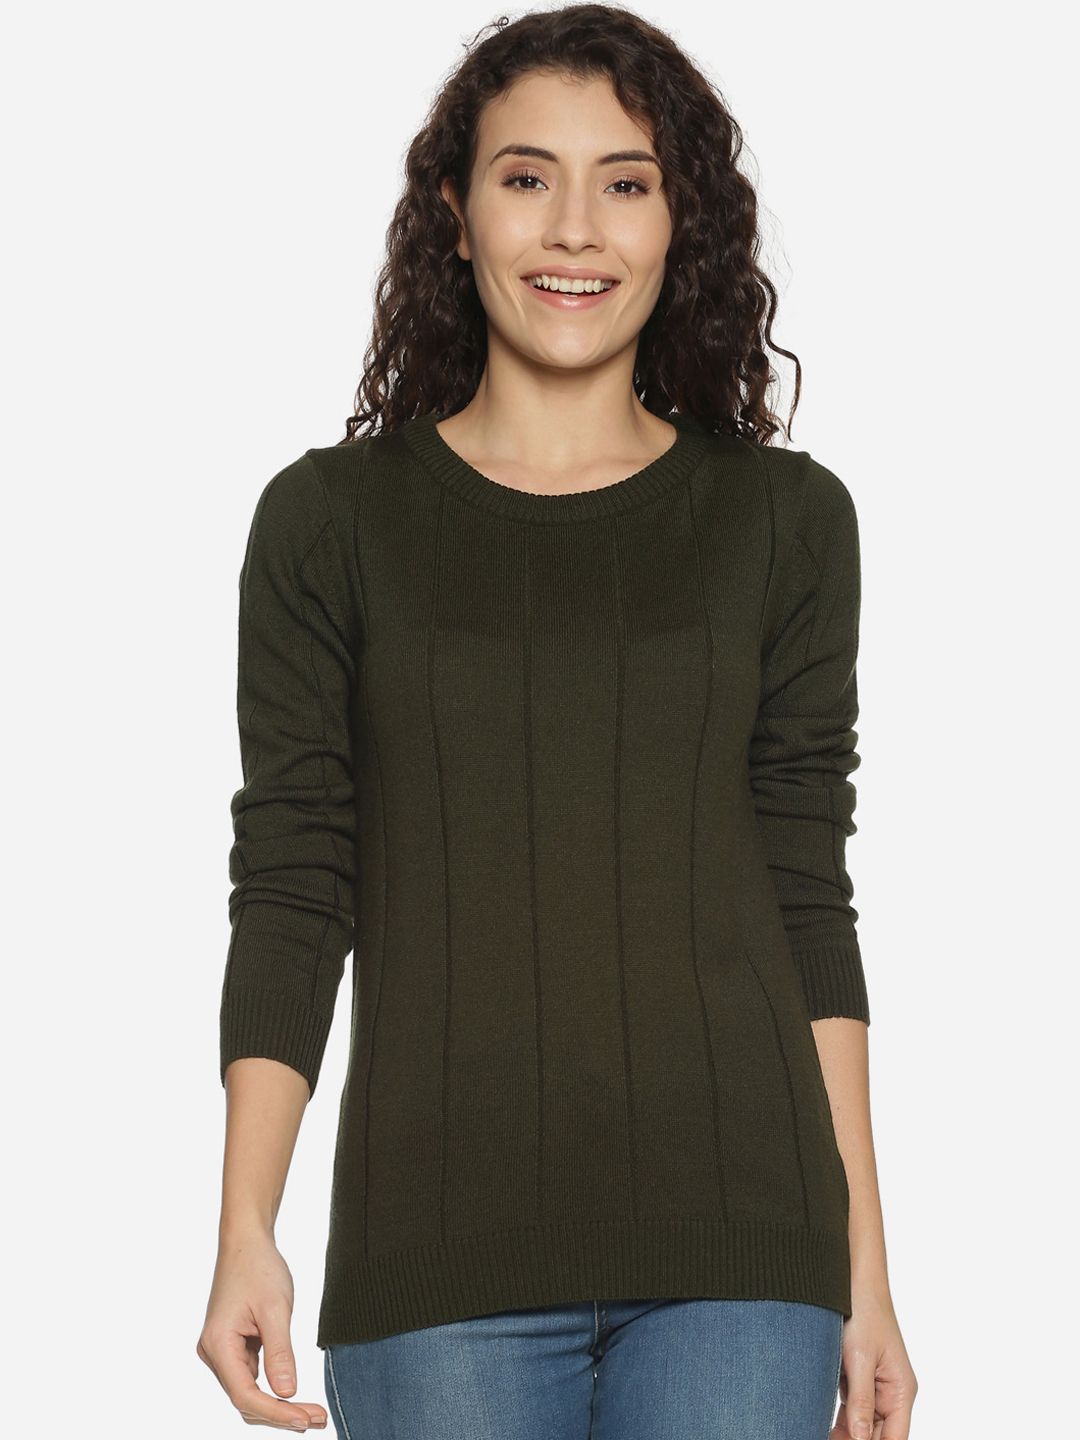 BEVERLY BLUES Women Olive Green Striped Pullover Sweater Price in India